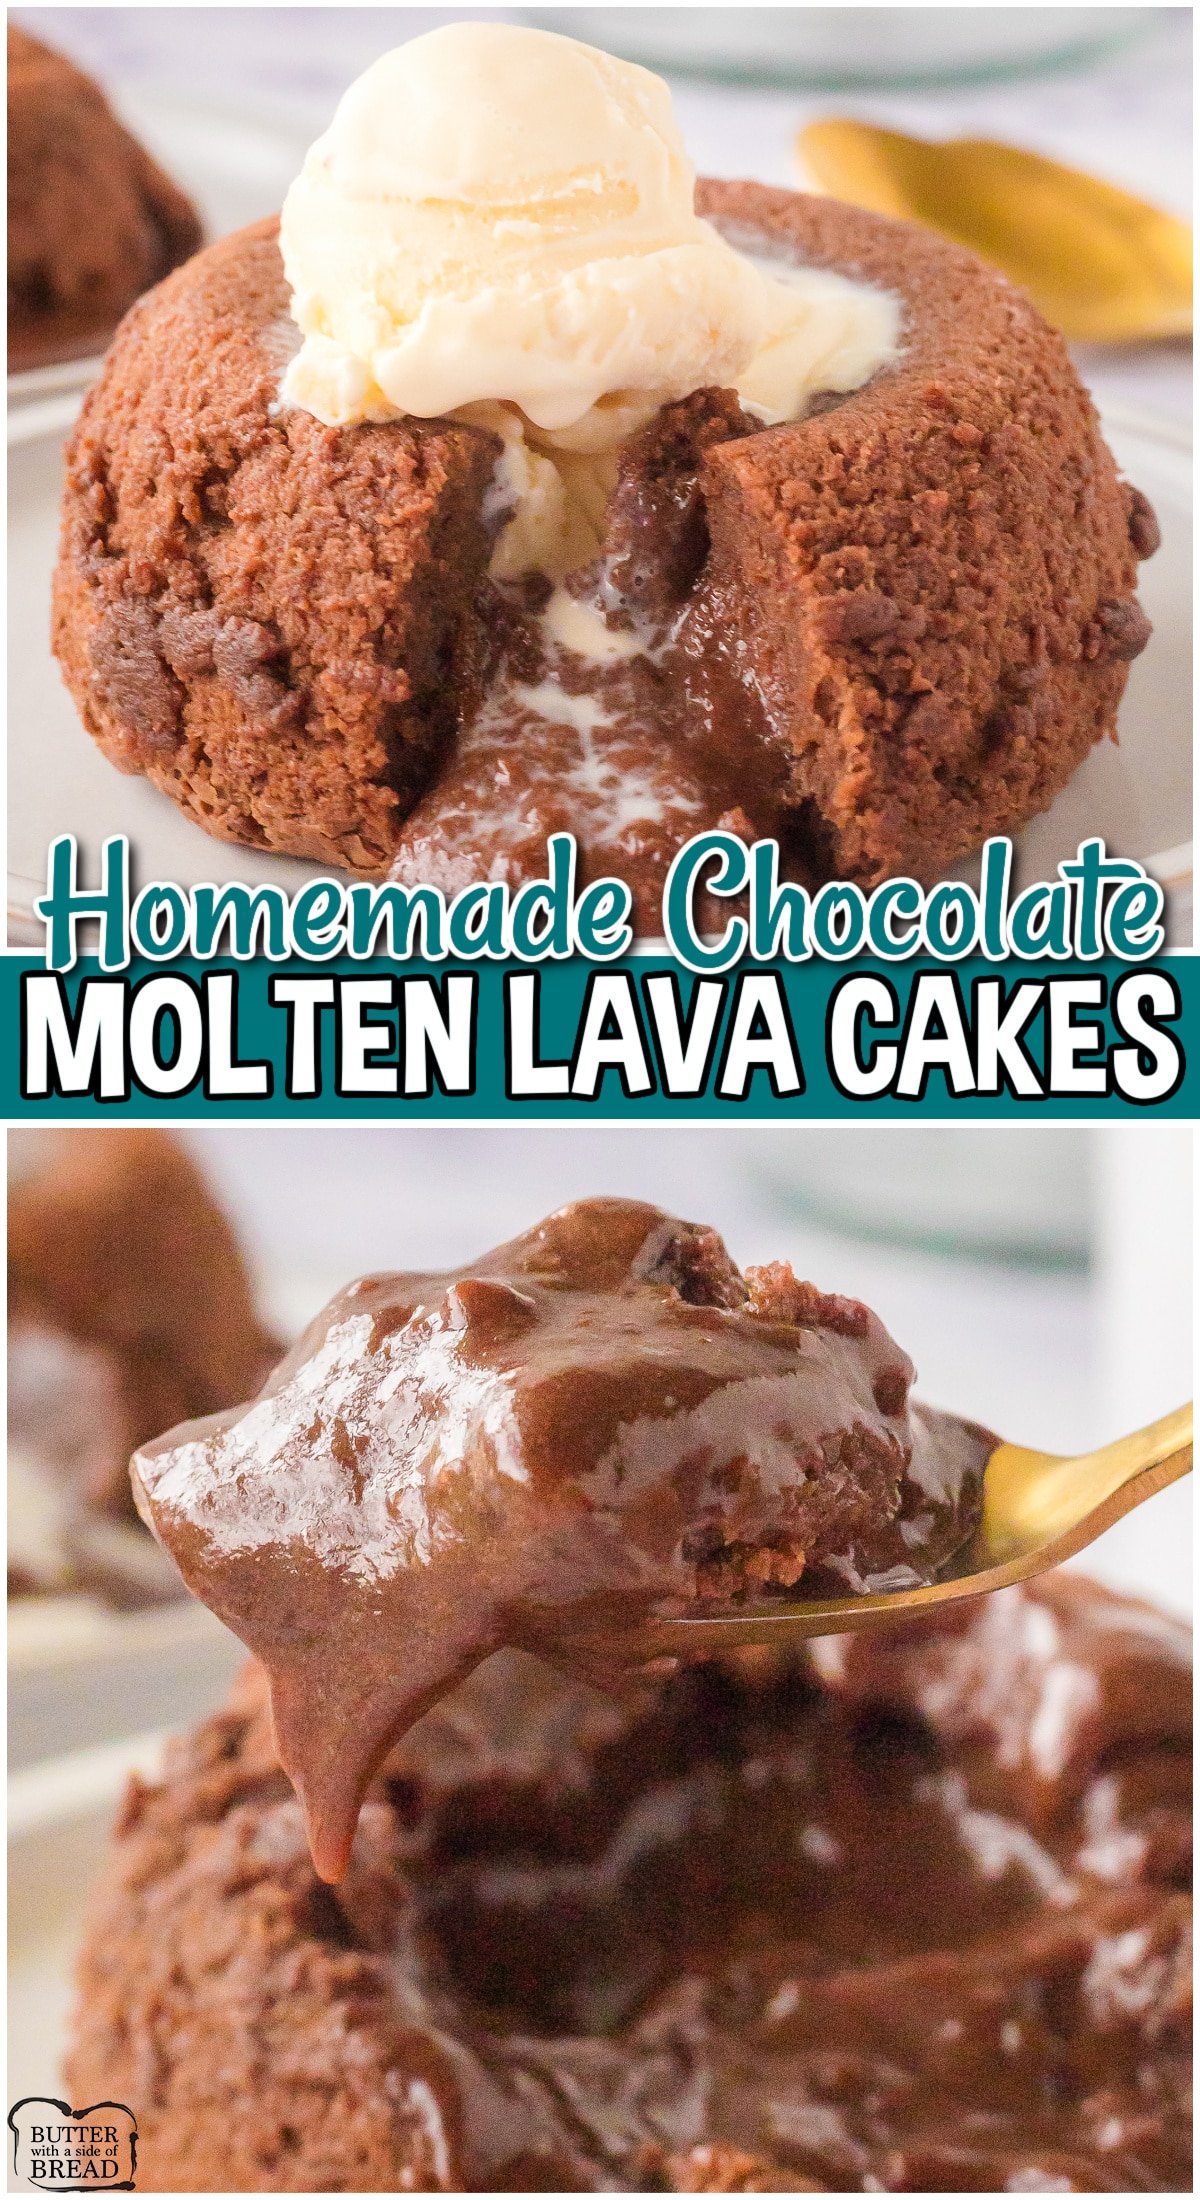 Chocolate Lava Cakes are decadent molten chocolate cakes that are known for their rich, gooey centers that spill out when cut into! This chocolate lava cake recipe comes together easily & uses classic ingredients such as butter, chocolate, eggs, sugar, and flour. 